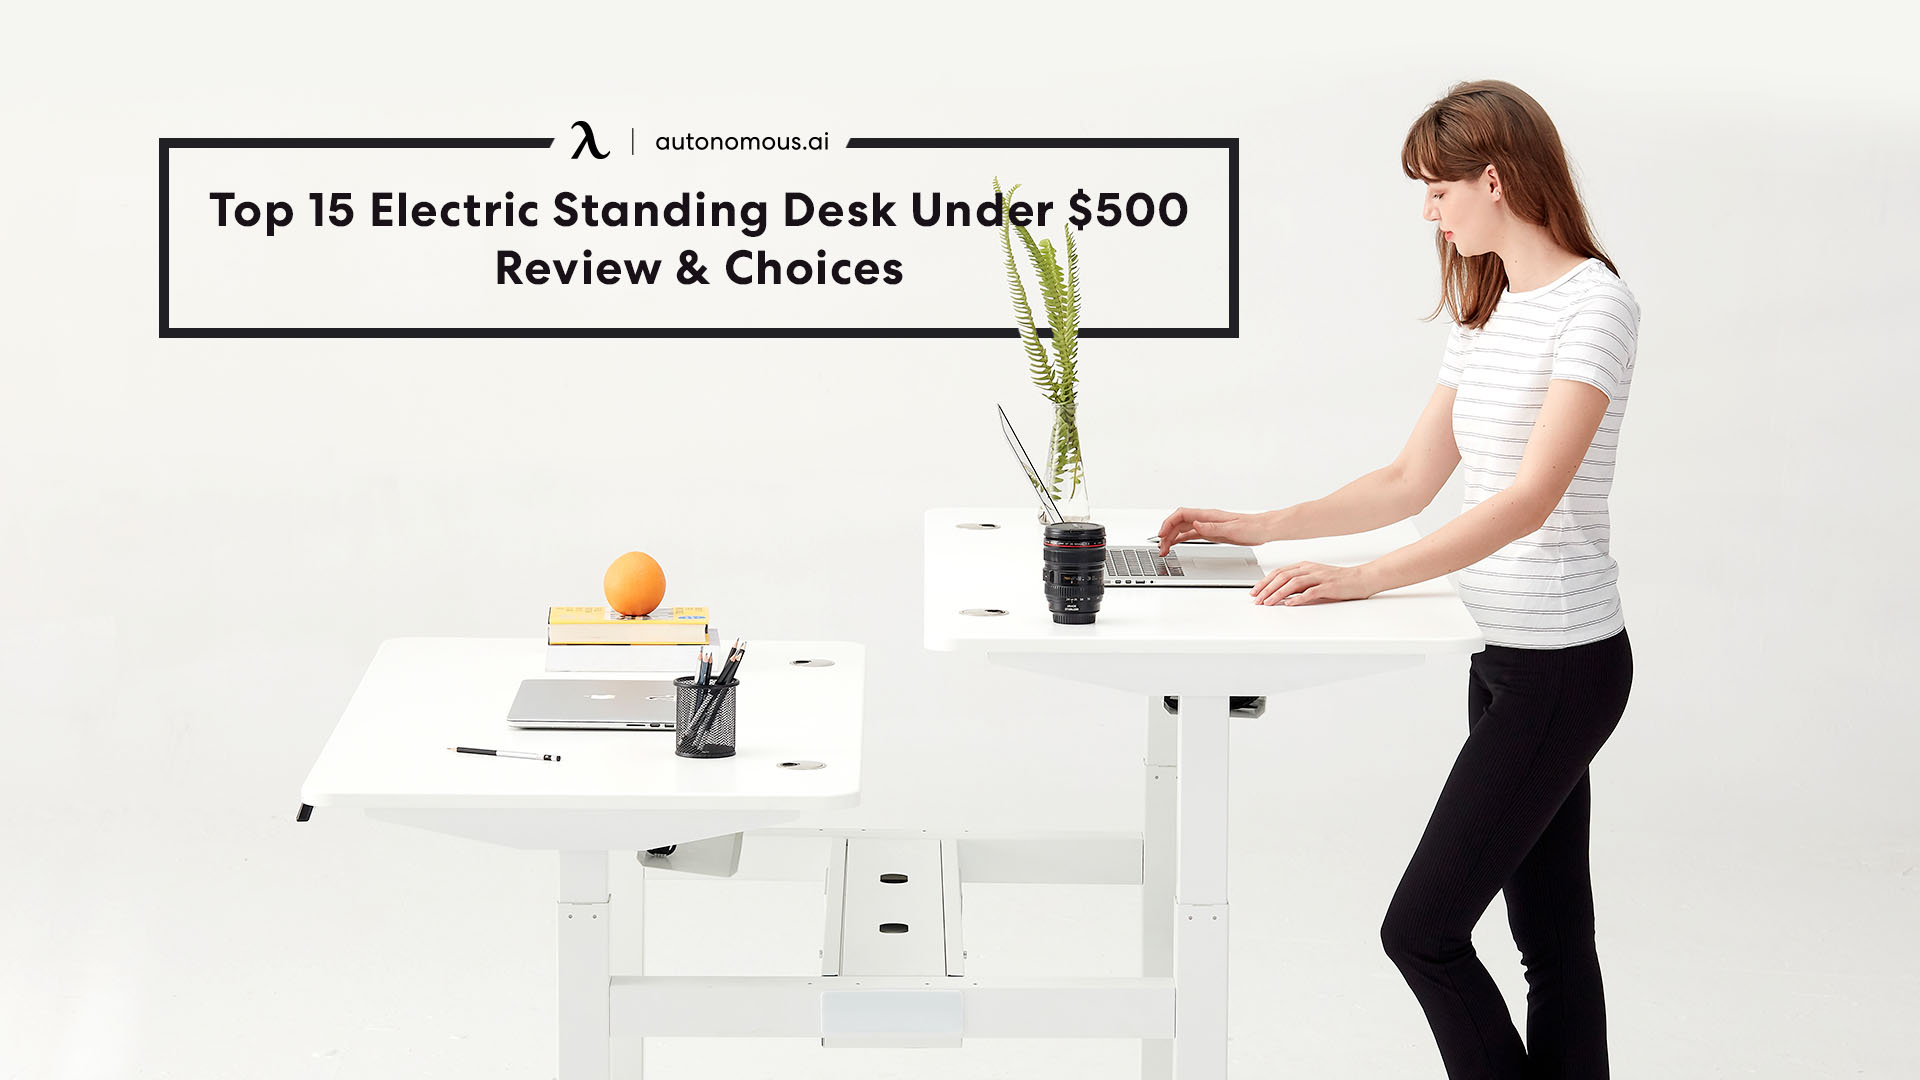 Top 15 Electric Standing Desk Under $500 – Review & Choices